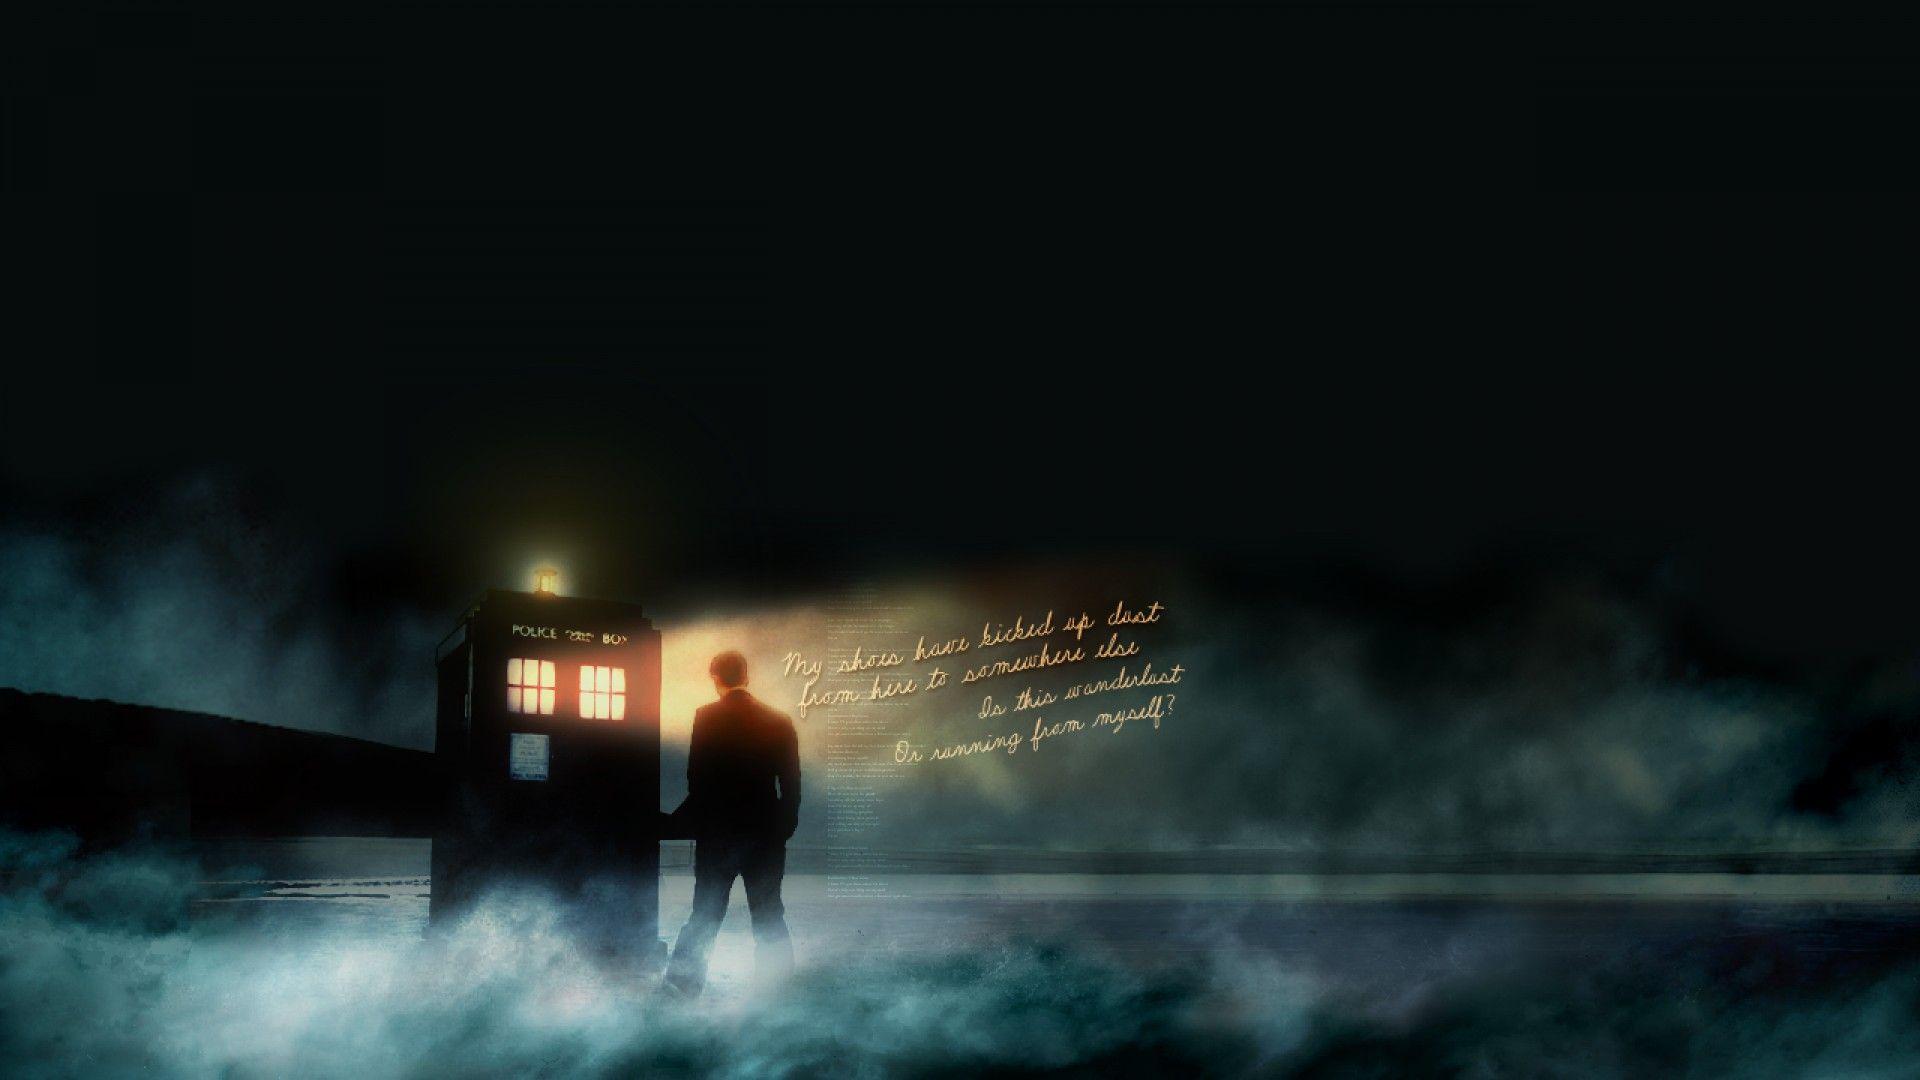 px Doctor Who Computer Wallpaper, Wallpaper and Picture for PC